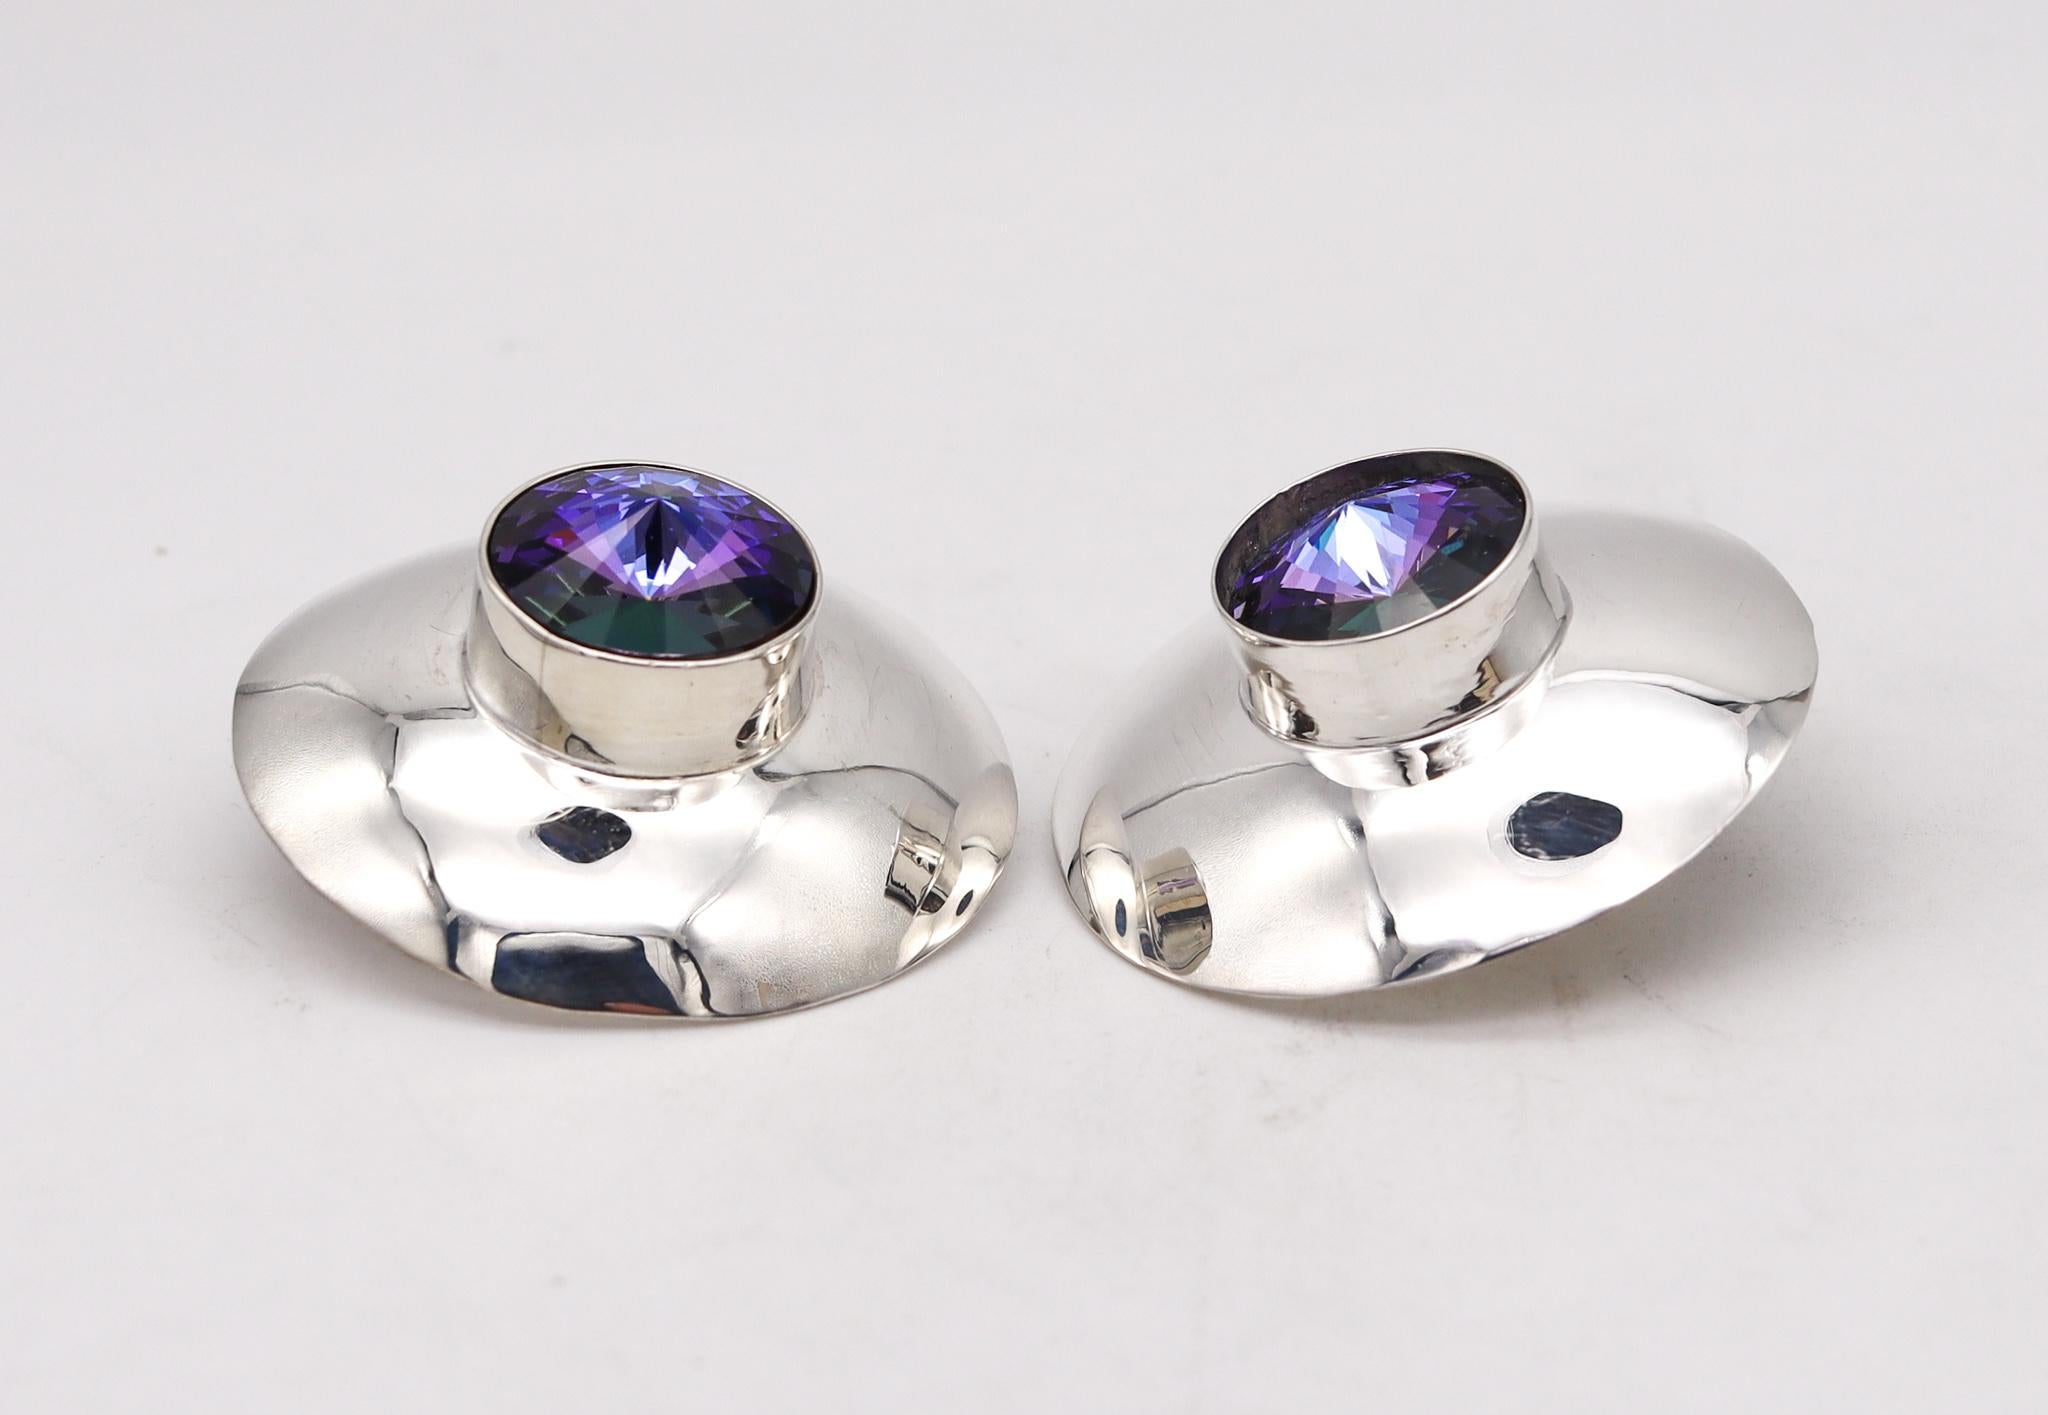 Brilliant Cut Mexico 1970 Taxco Retro Modernist Earrings In Sterling Silver With Purple Glass For Sale